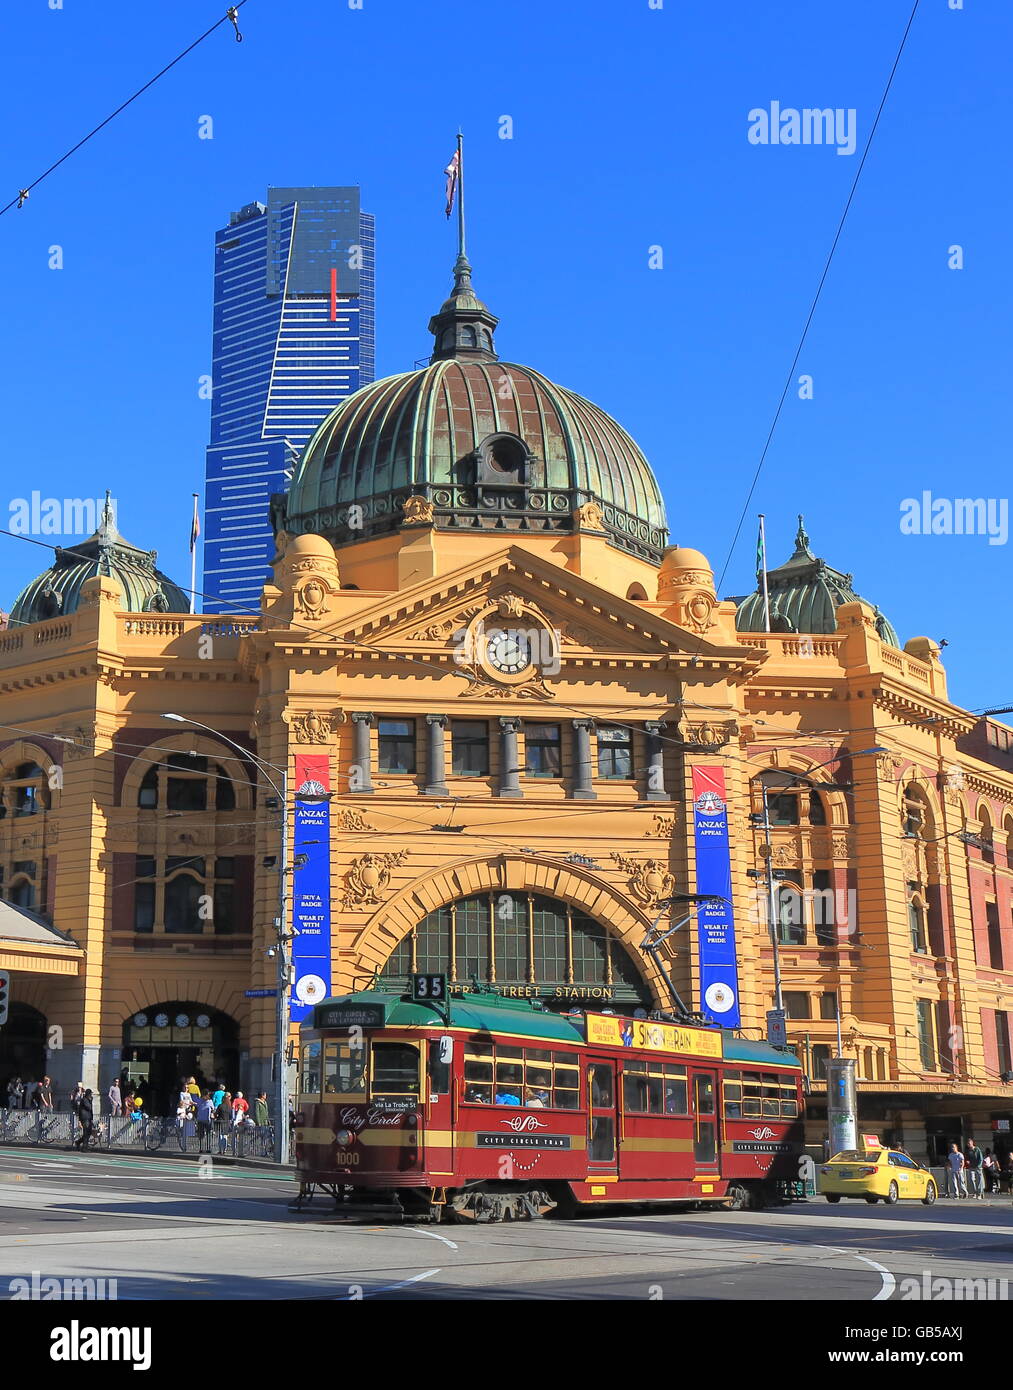 Iconic tram runs in front of Flinders Street Station in Melbourne Australia Stock Photo